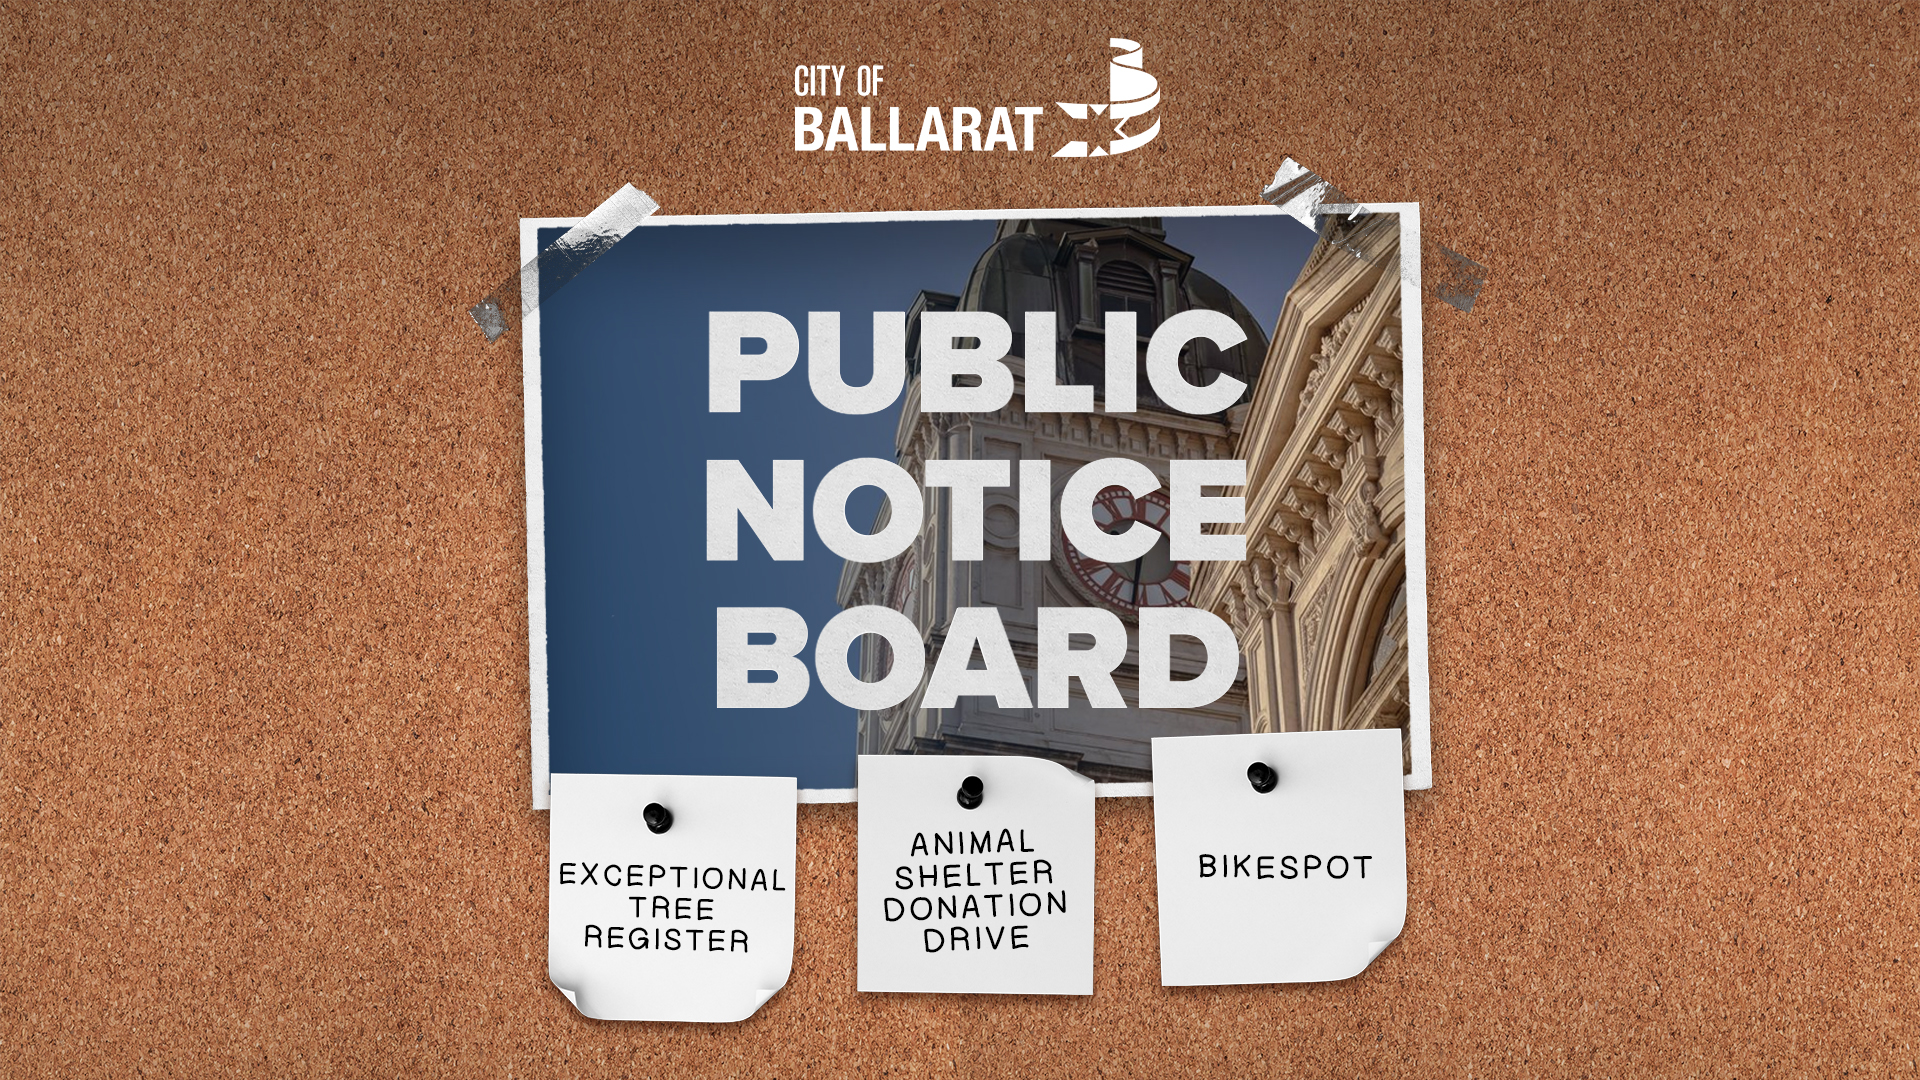 Notice board with Public Notice Board text over an image of Ballarat Town Hall. Three notes underneath with text saying EXCEPTIONAL TREE REGISTER, ANIMAL SHELTER DONATION DRIVE, BIKESPOT